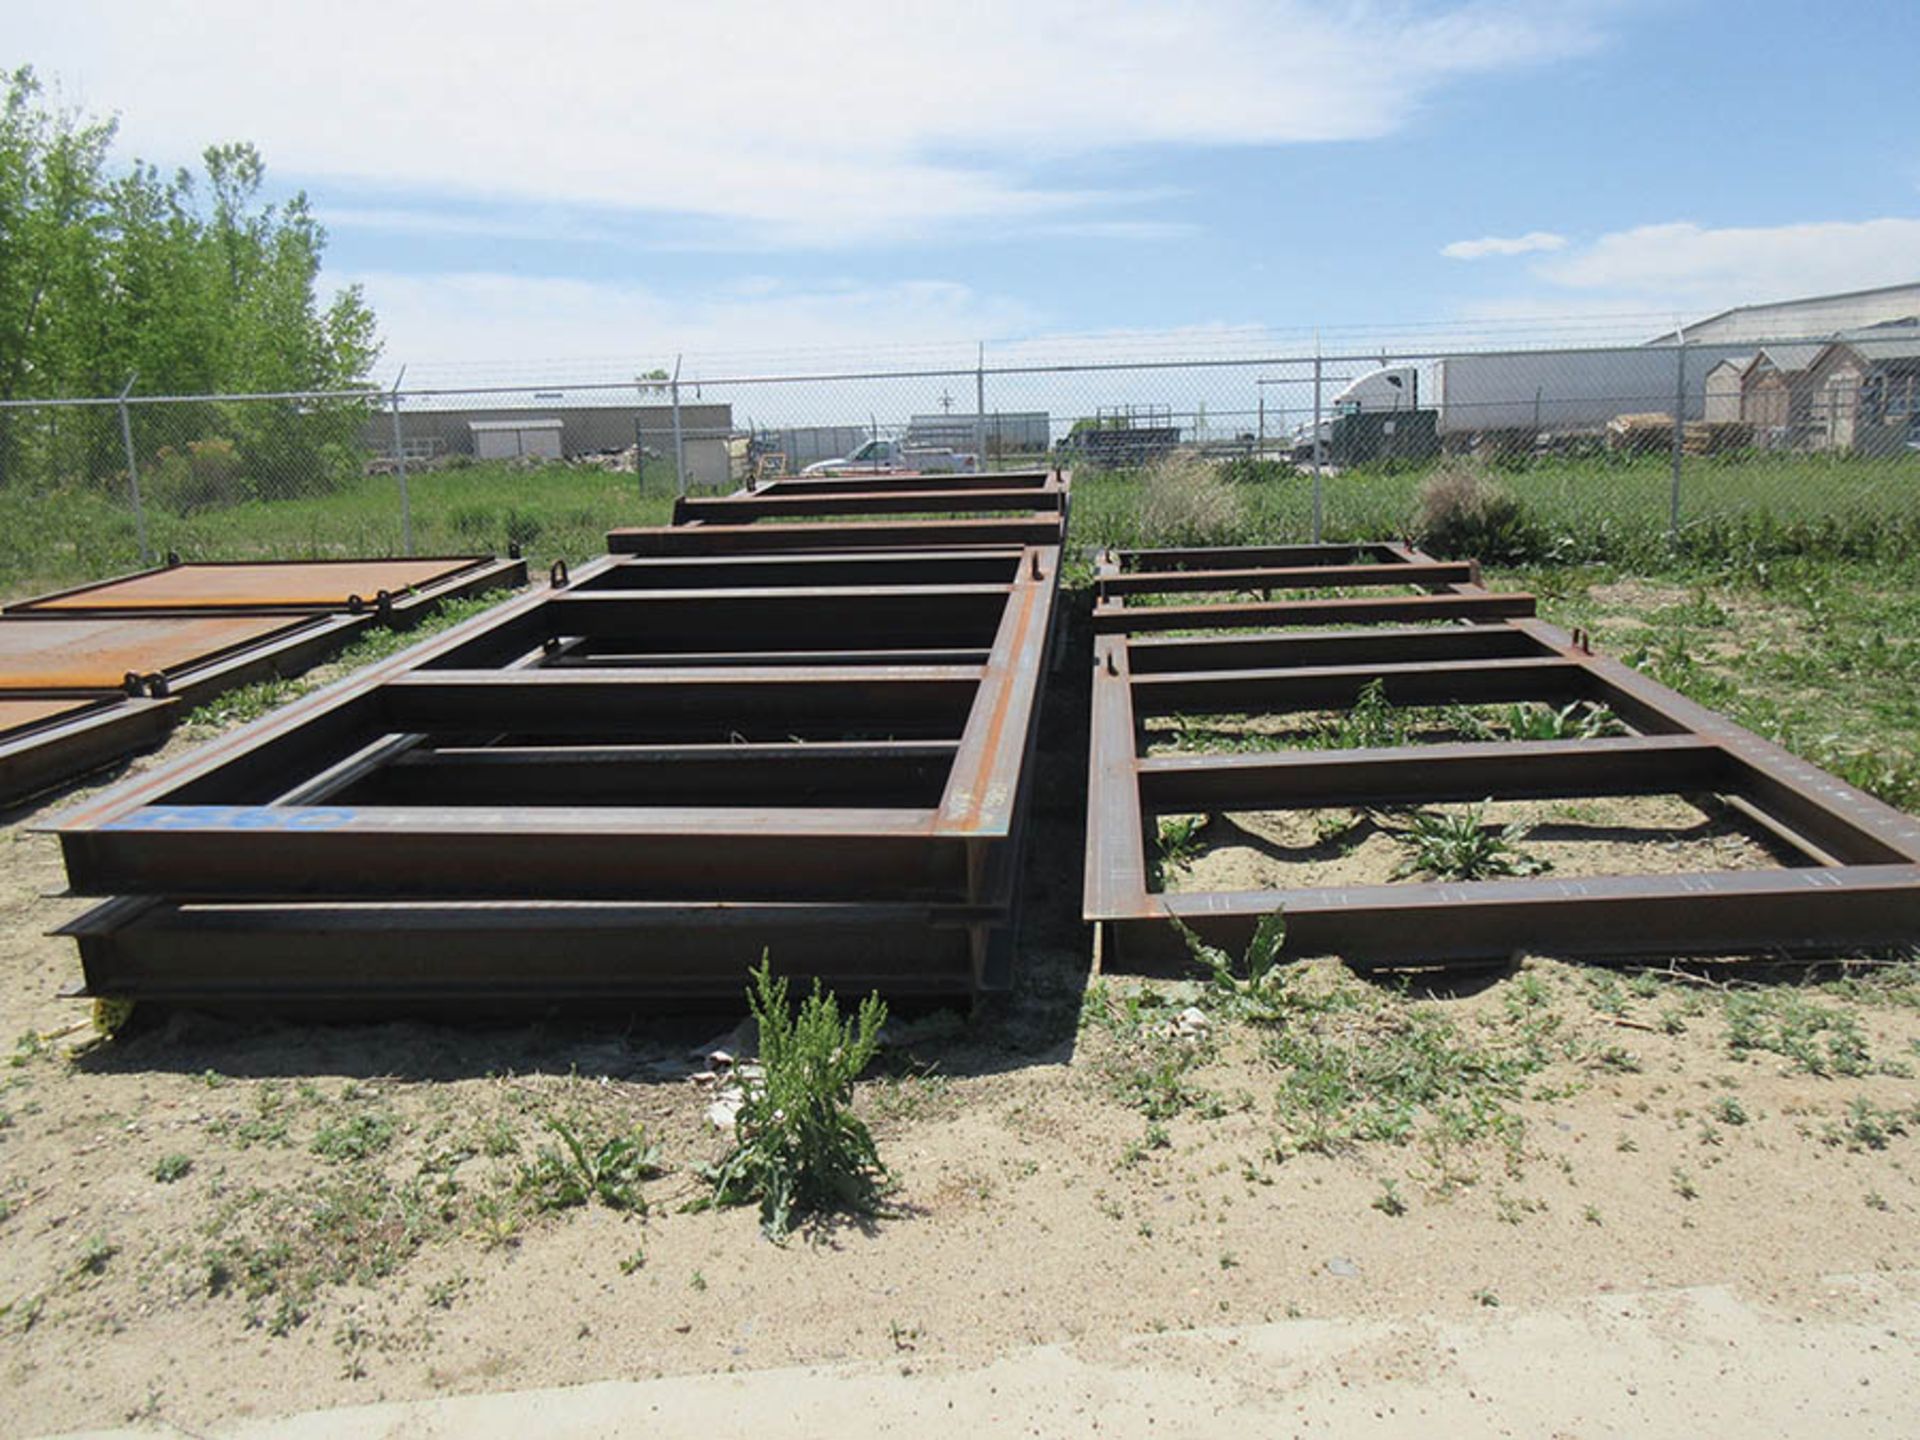 LOT ASST'D METALS, SKIDS, PIPES, PLATES, SEPARATOR HOUSING PARTS, AND PIPE RACKS, (IN YARD) - Image 7 of 8